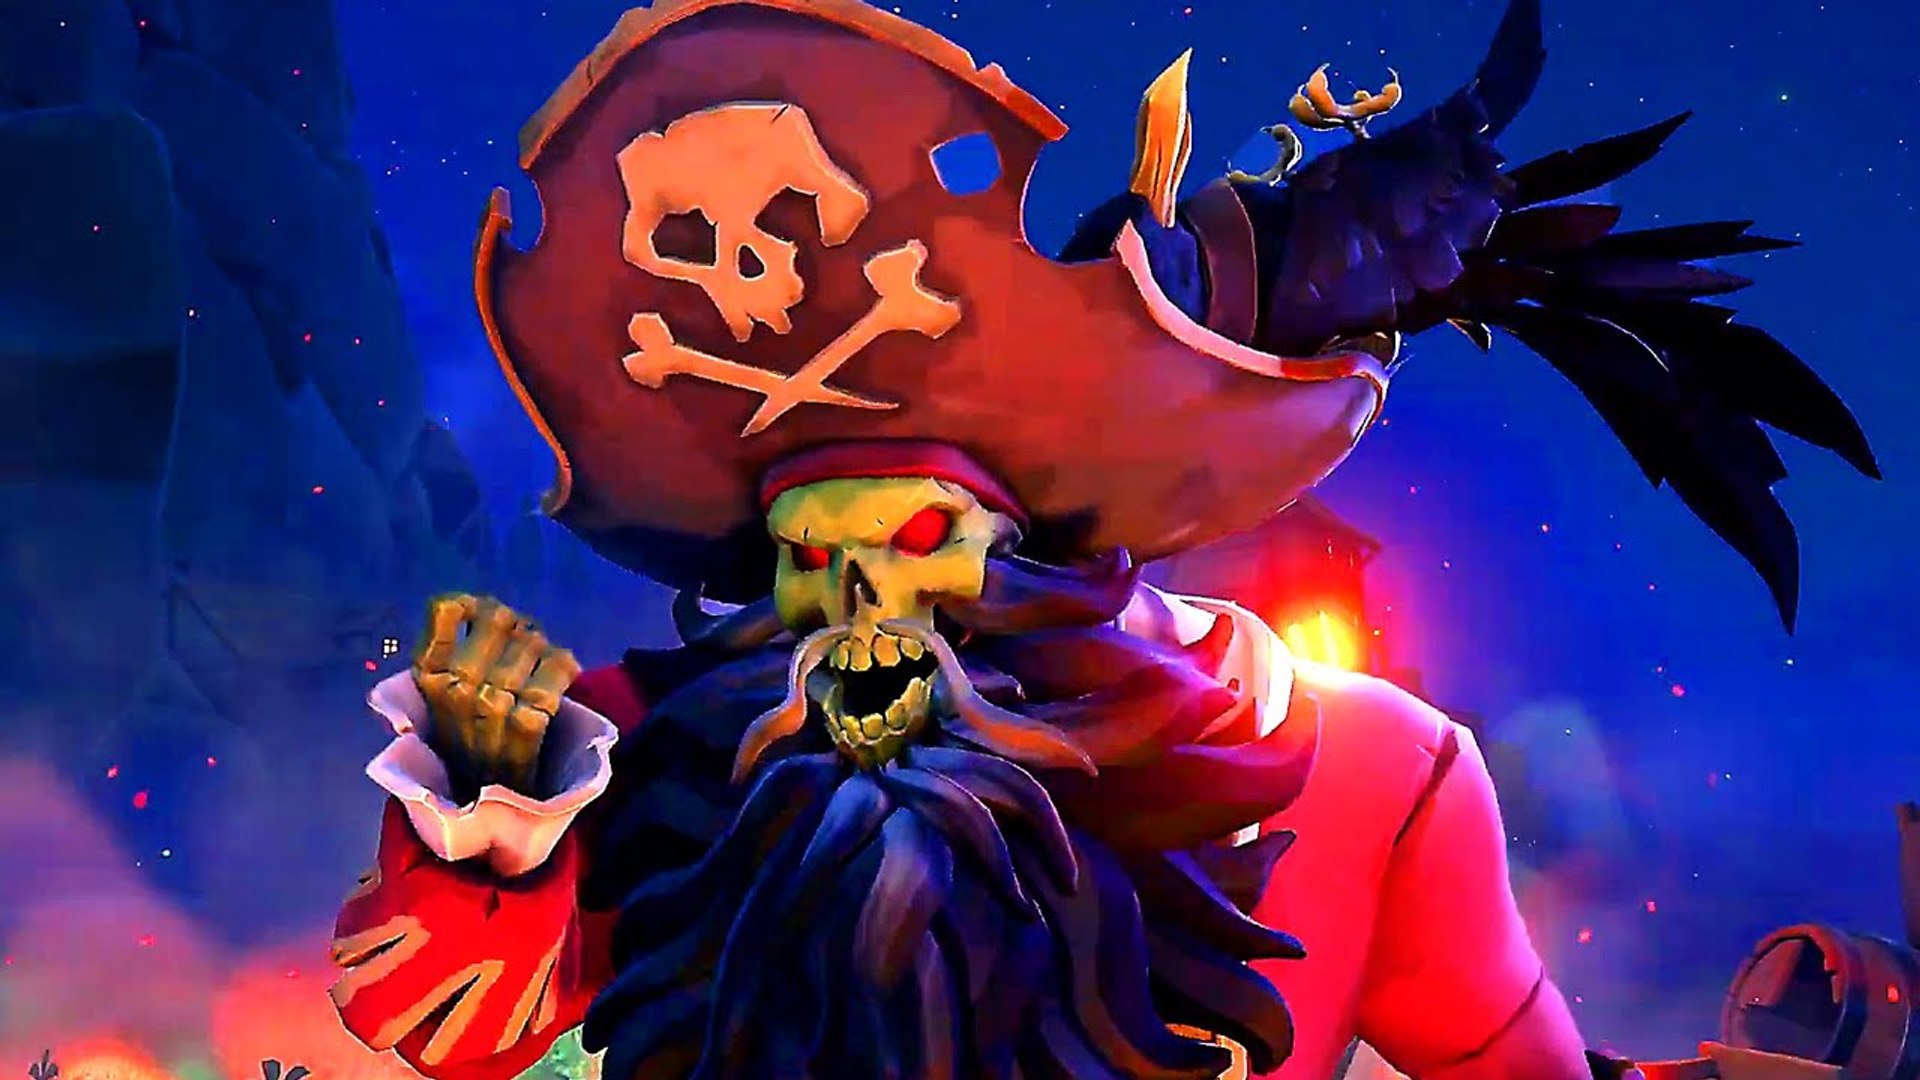 SEA OF THIEVES: The Legend Of Monkey Island Trailer - Vidéo Dailymotion